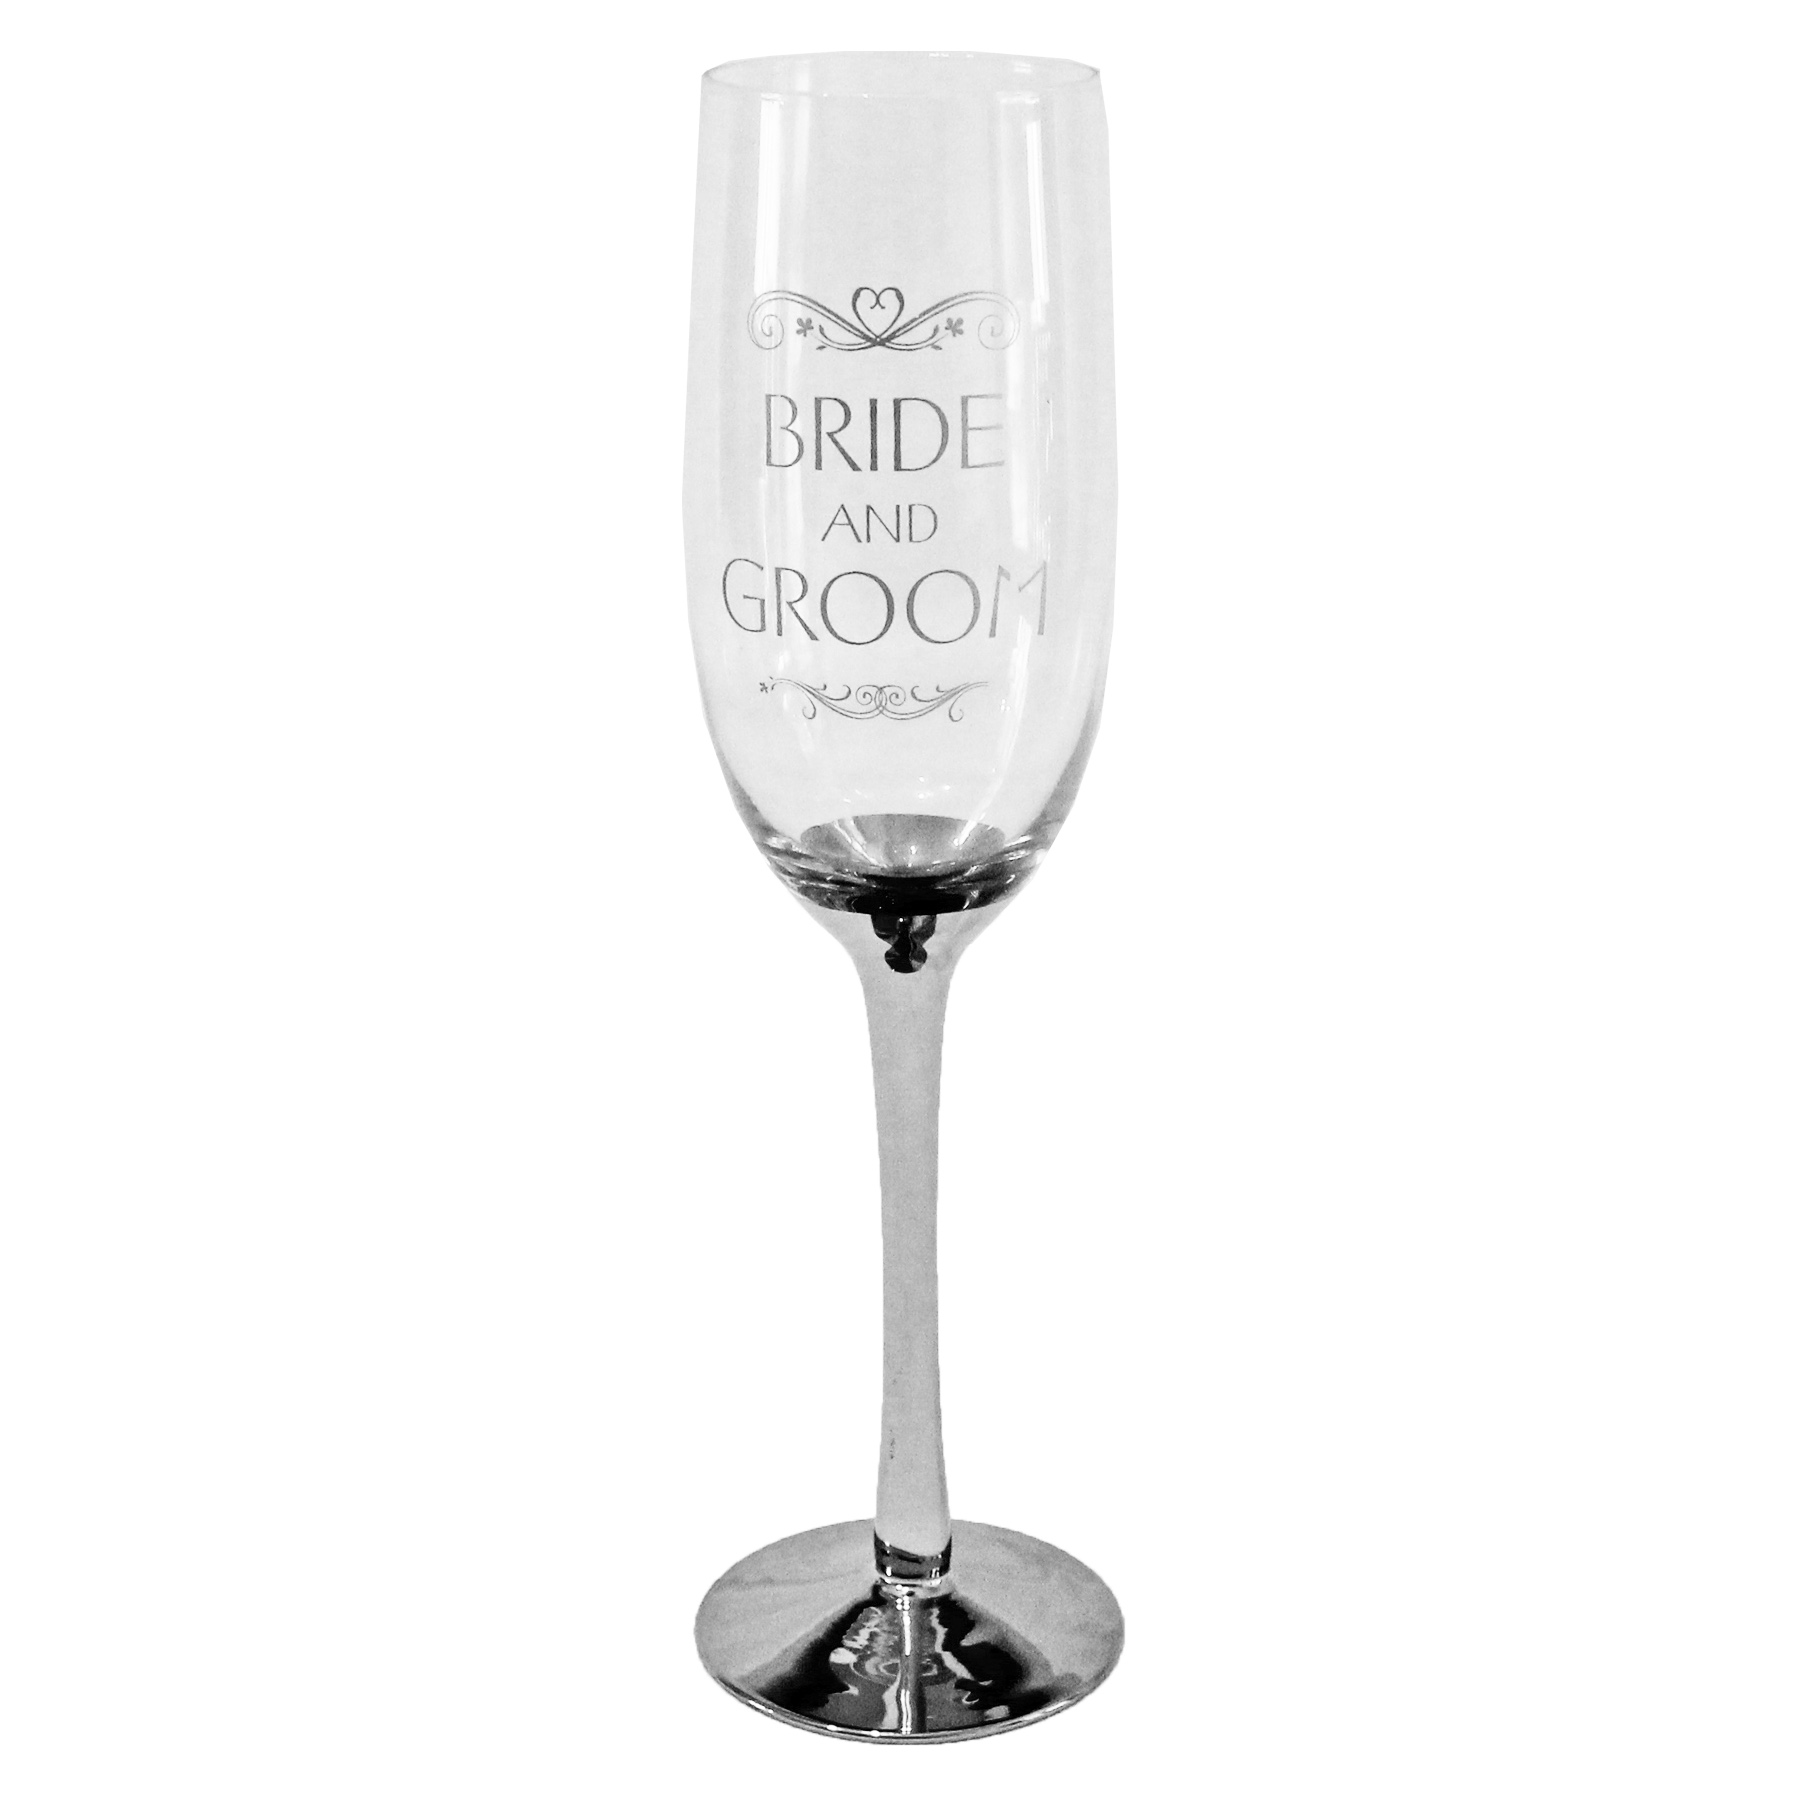 Wedding Day Champagne flute with silver stem - Bride and Groom